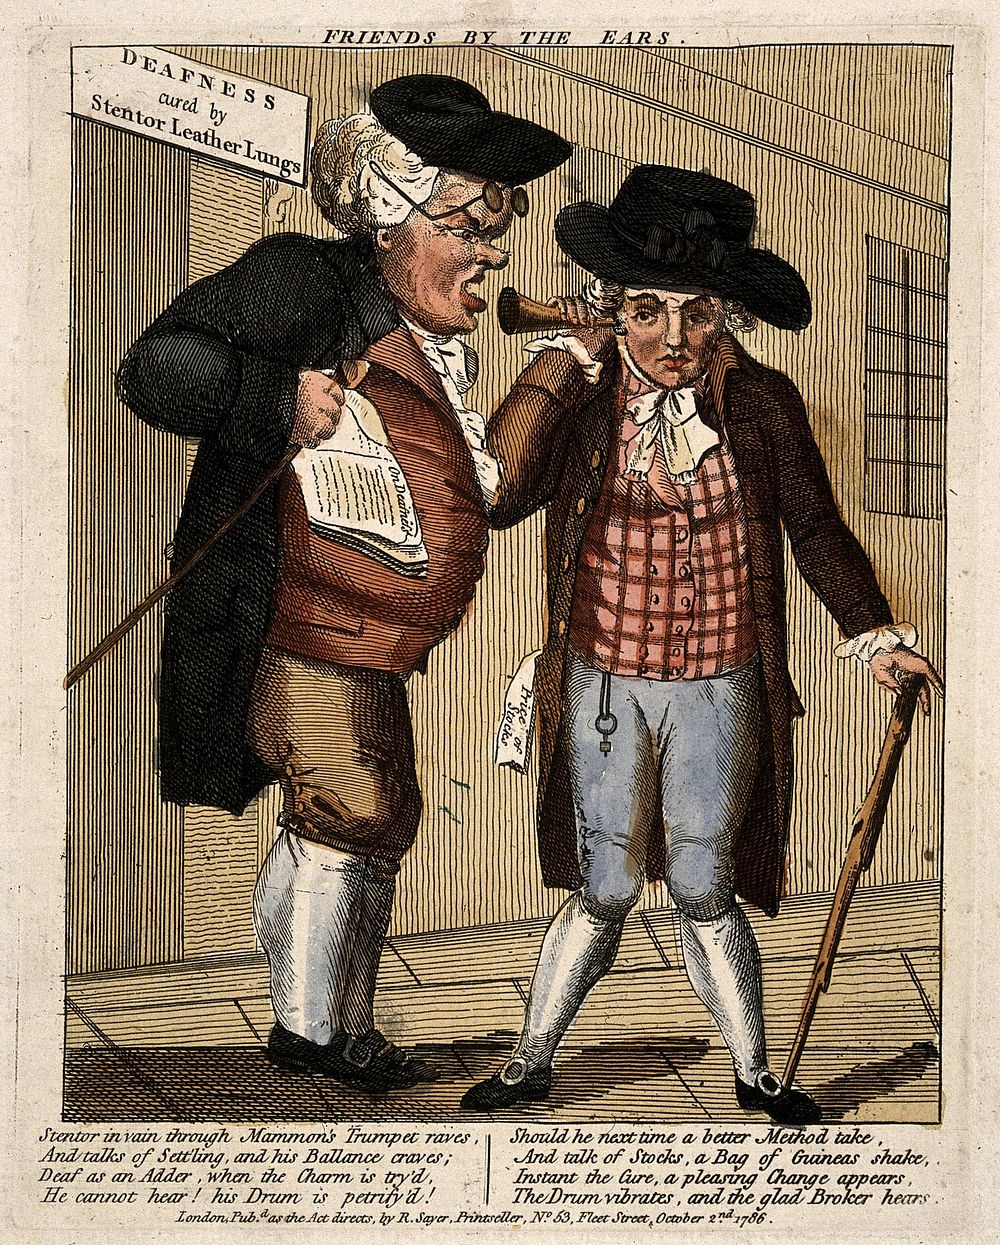 A stockbroker feigning deafness to avoid paying the man who claims to have restored his hearing. Coloured etching, 1786.